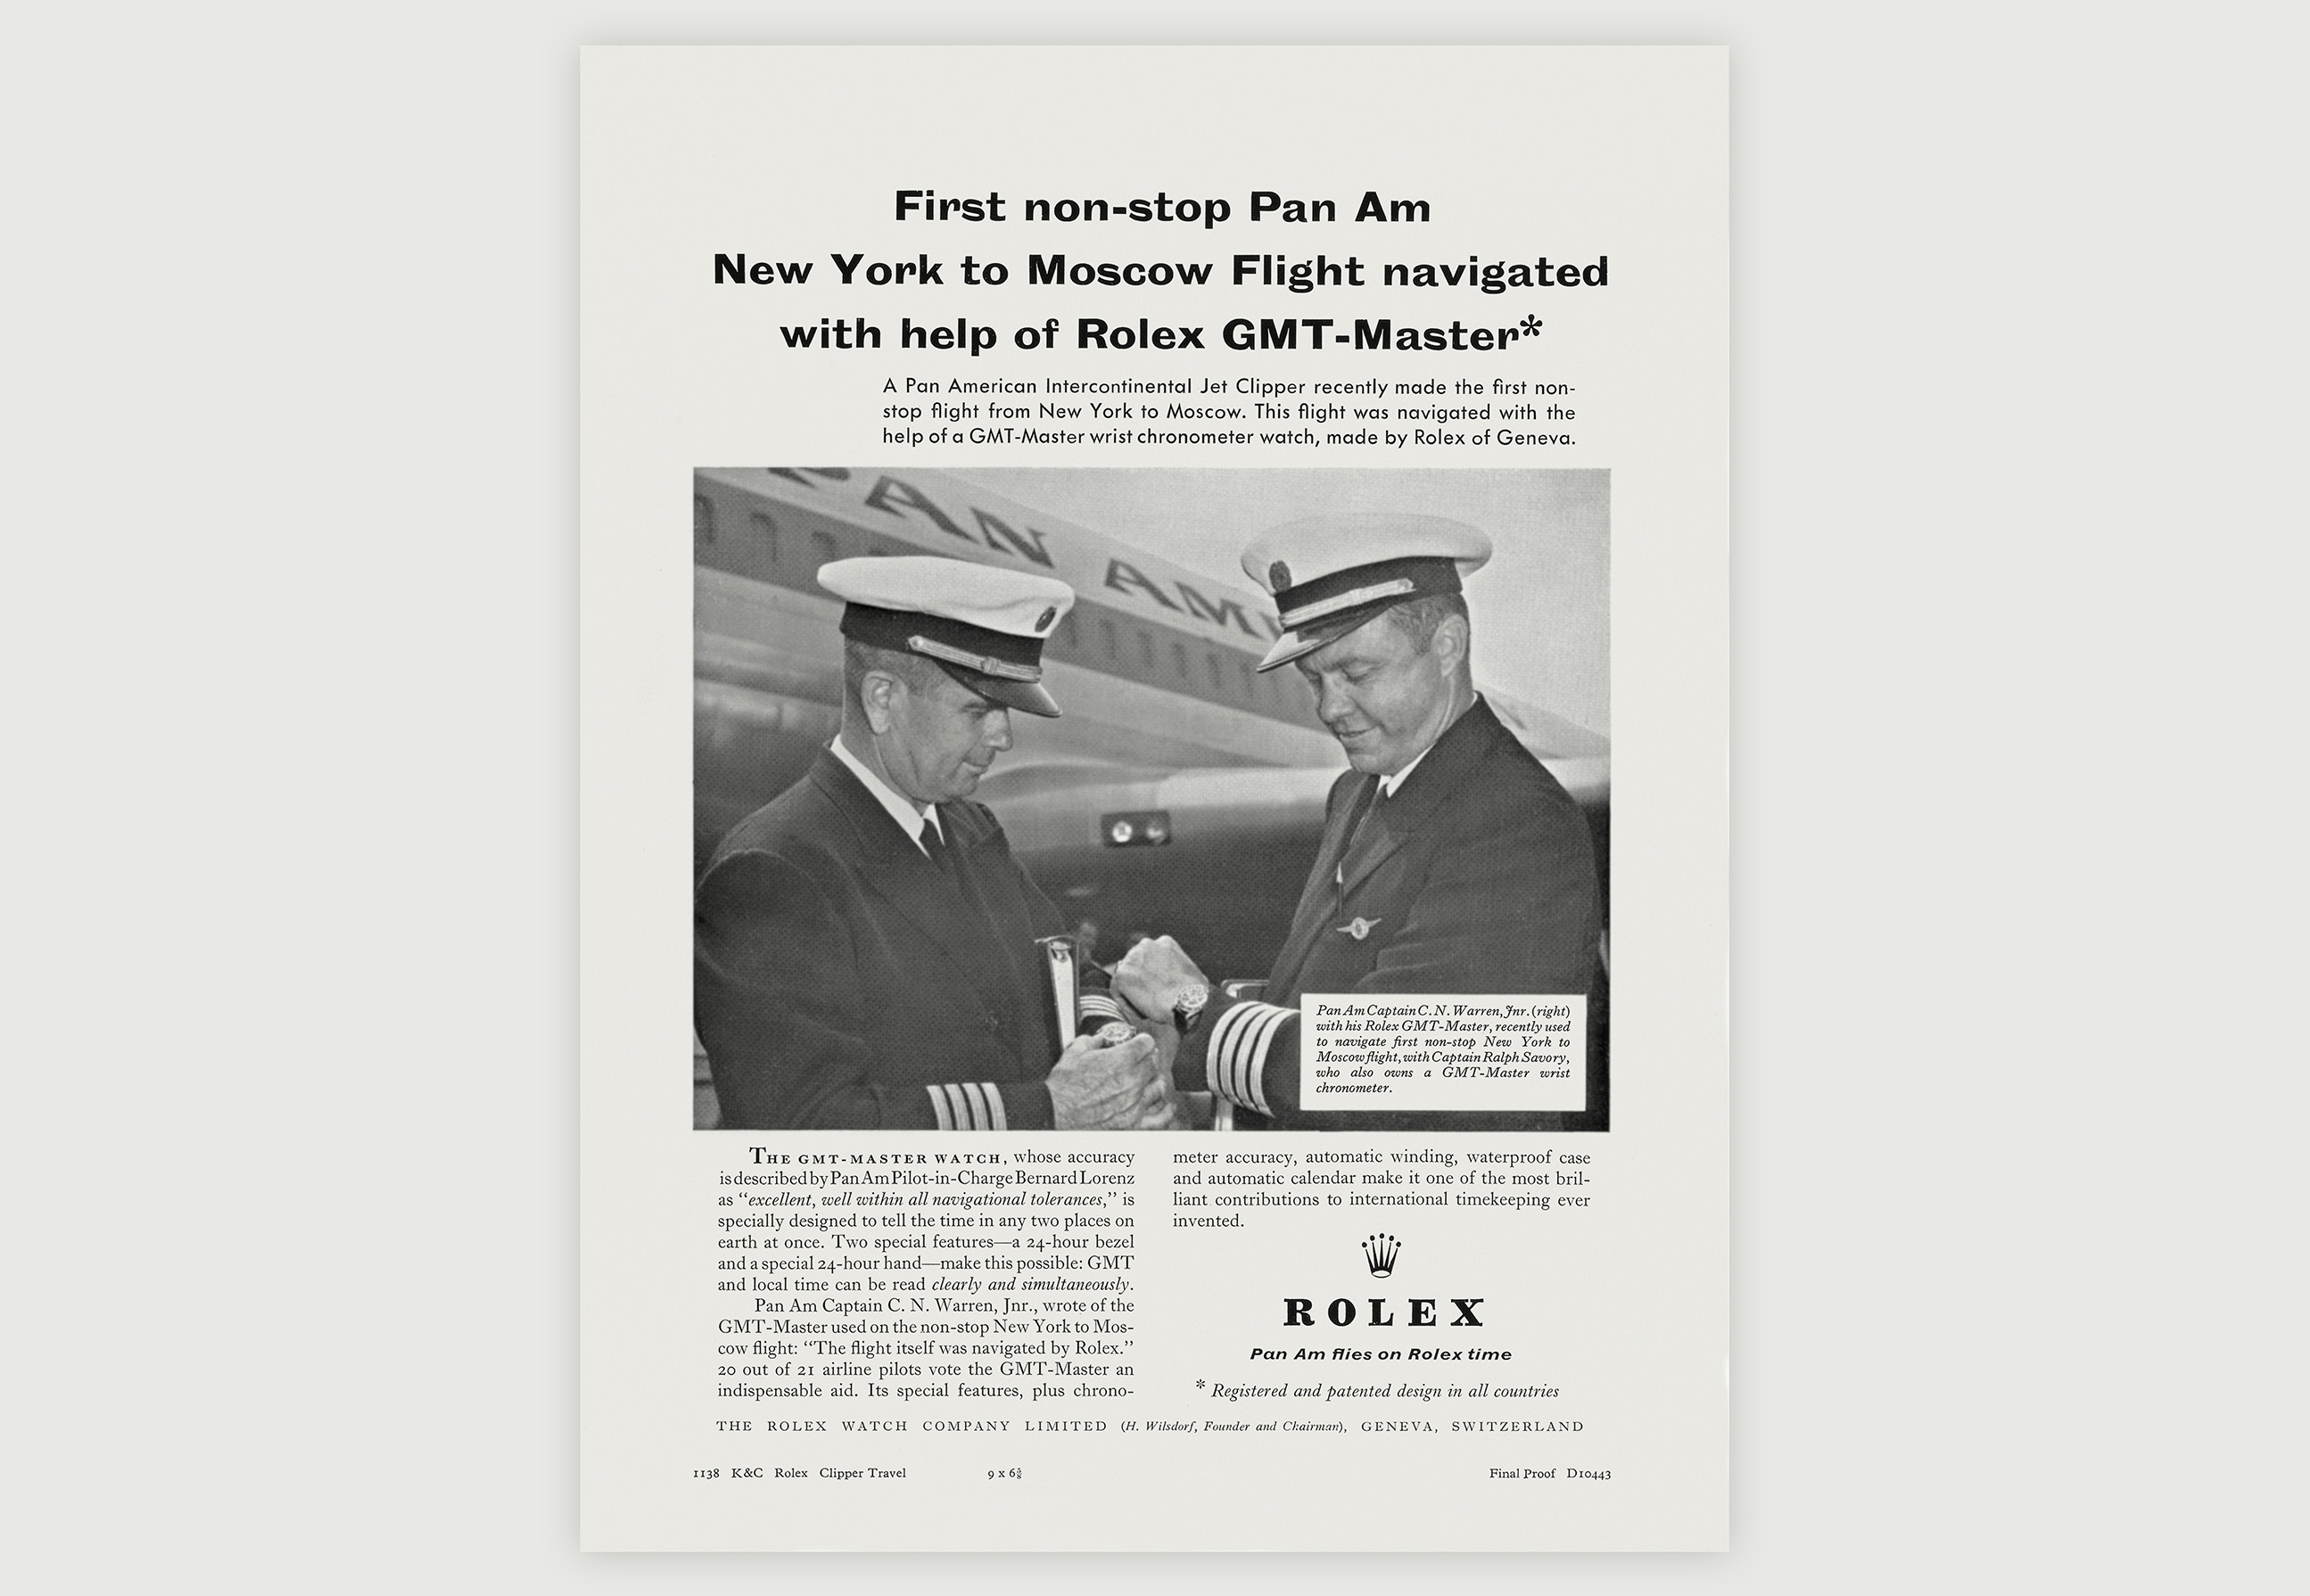 New York to Moscow with Rolex help vintage news article 